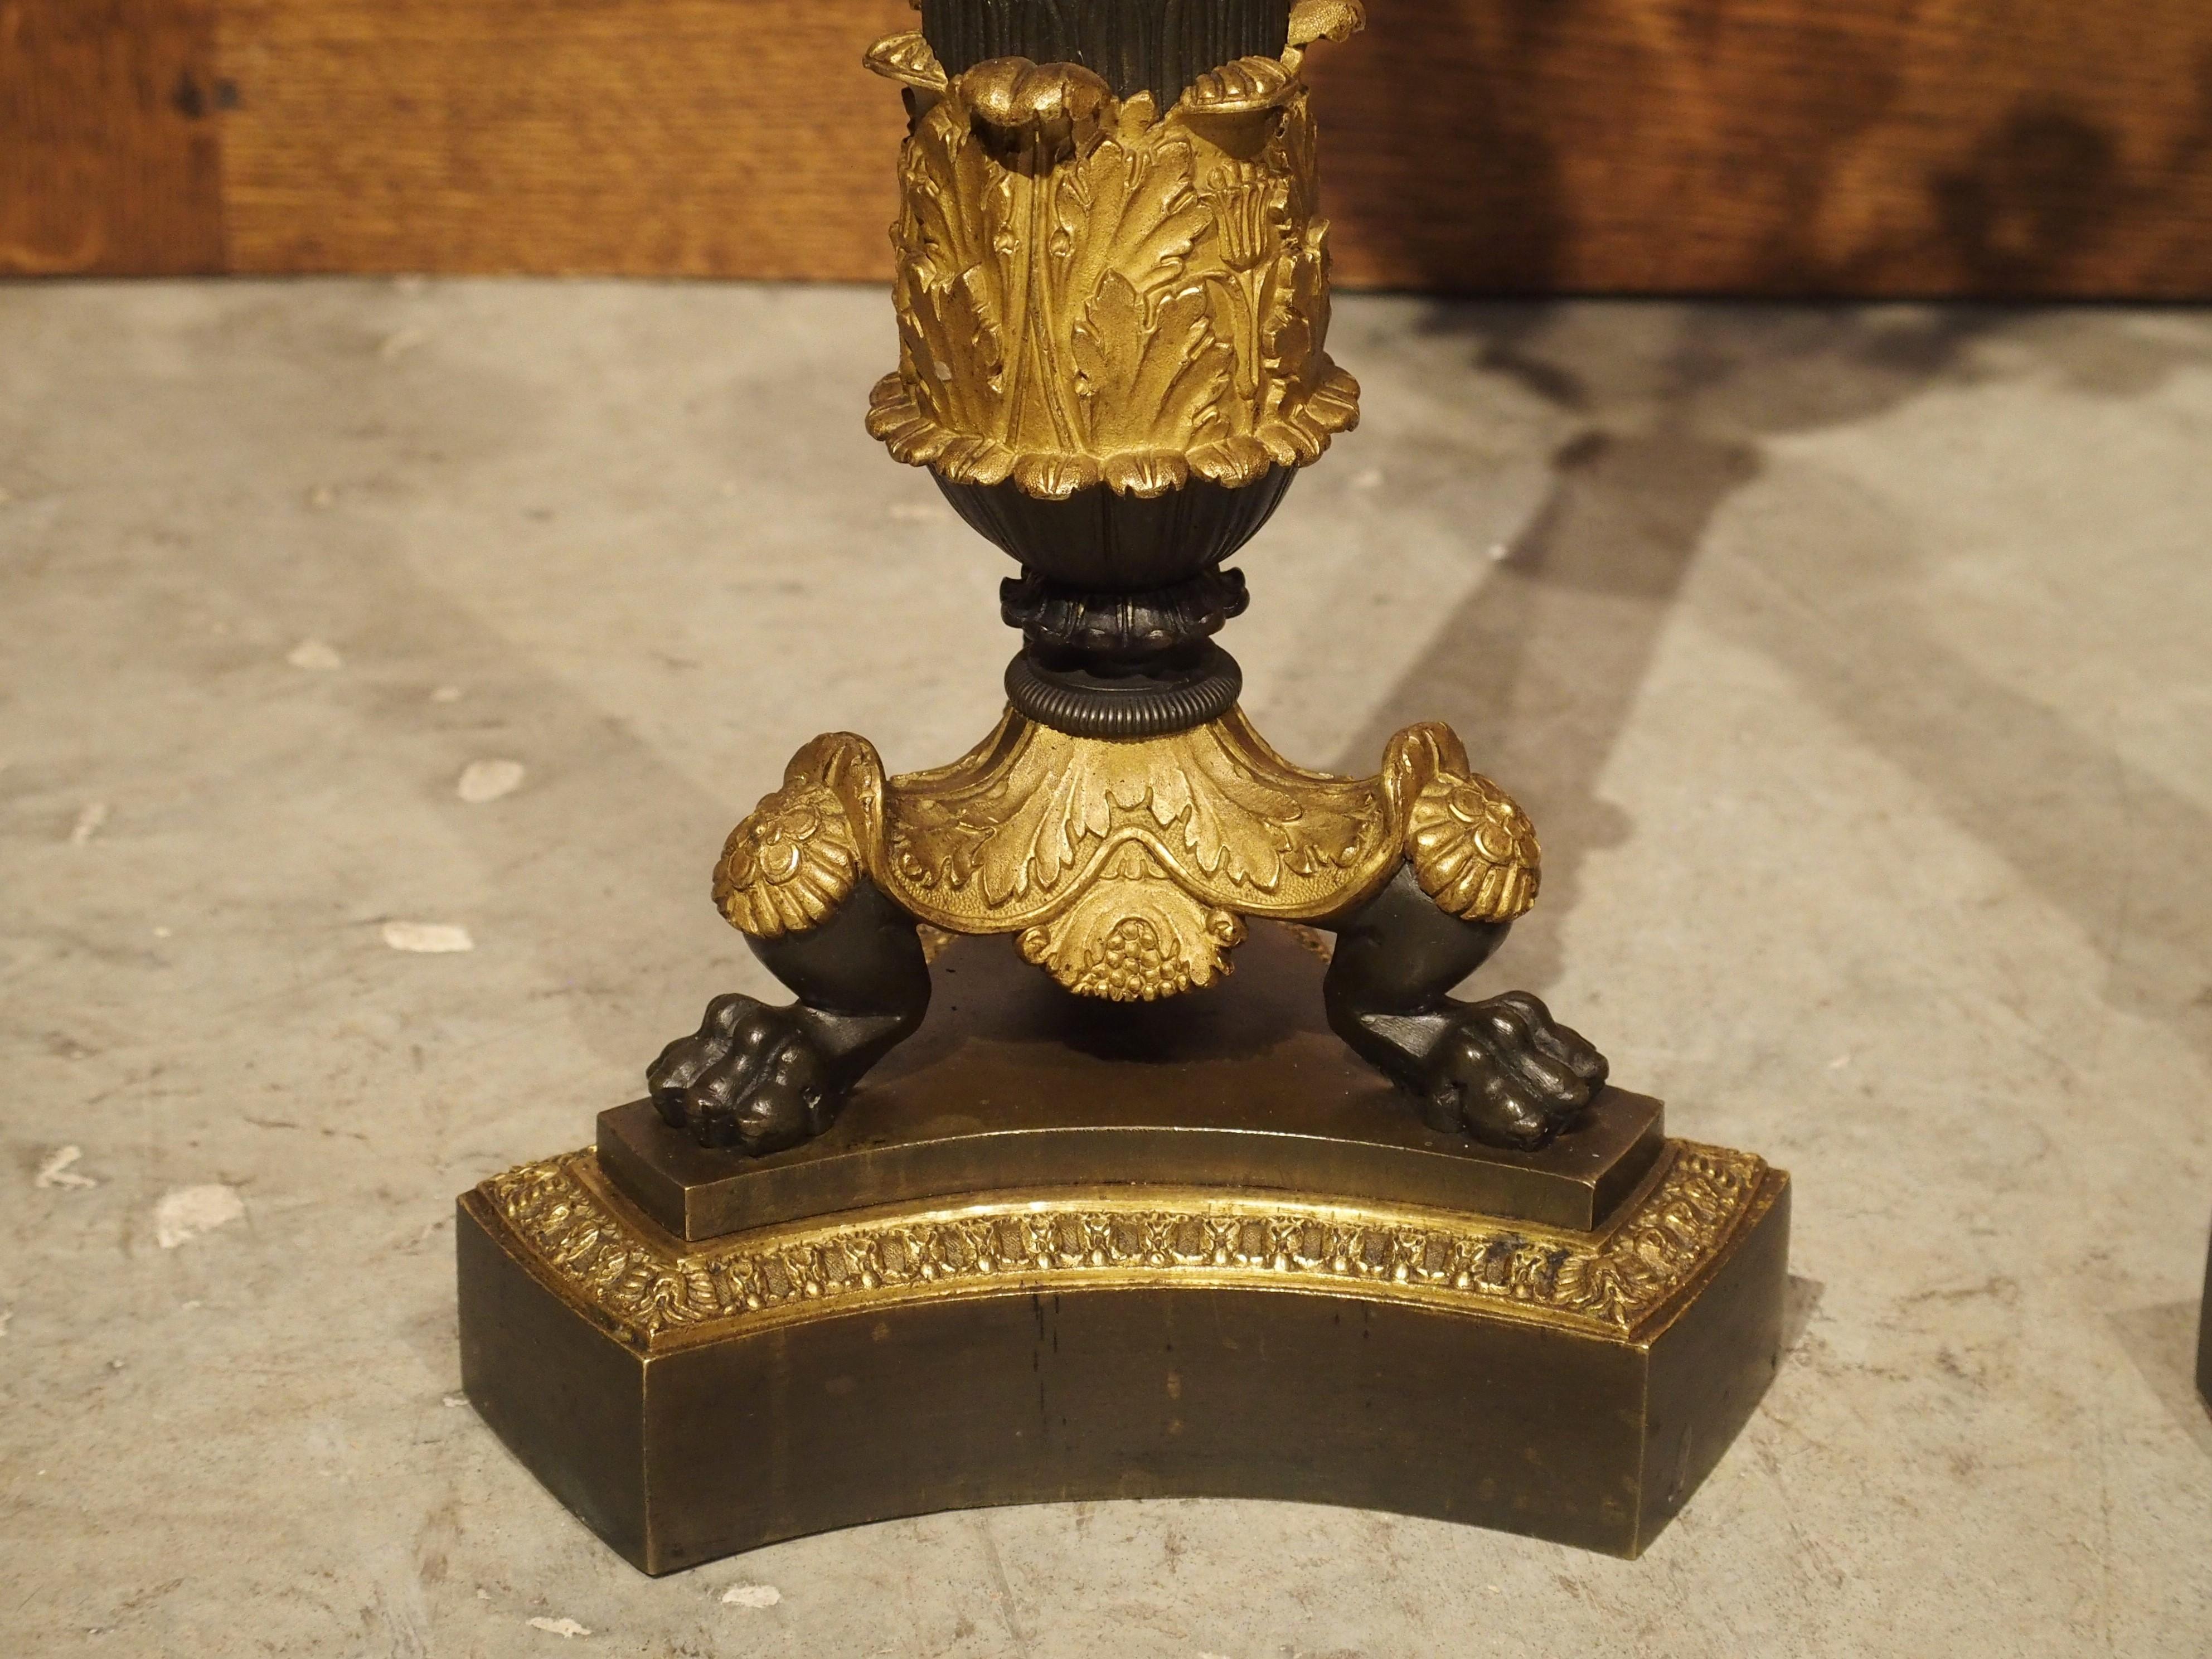 Pair of 19th Century French Empire Candelabra with Tripartite Lion Paw Feet For Sale 2